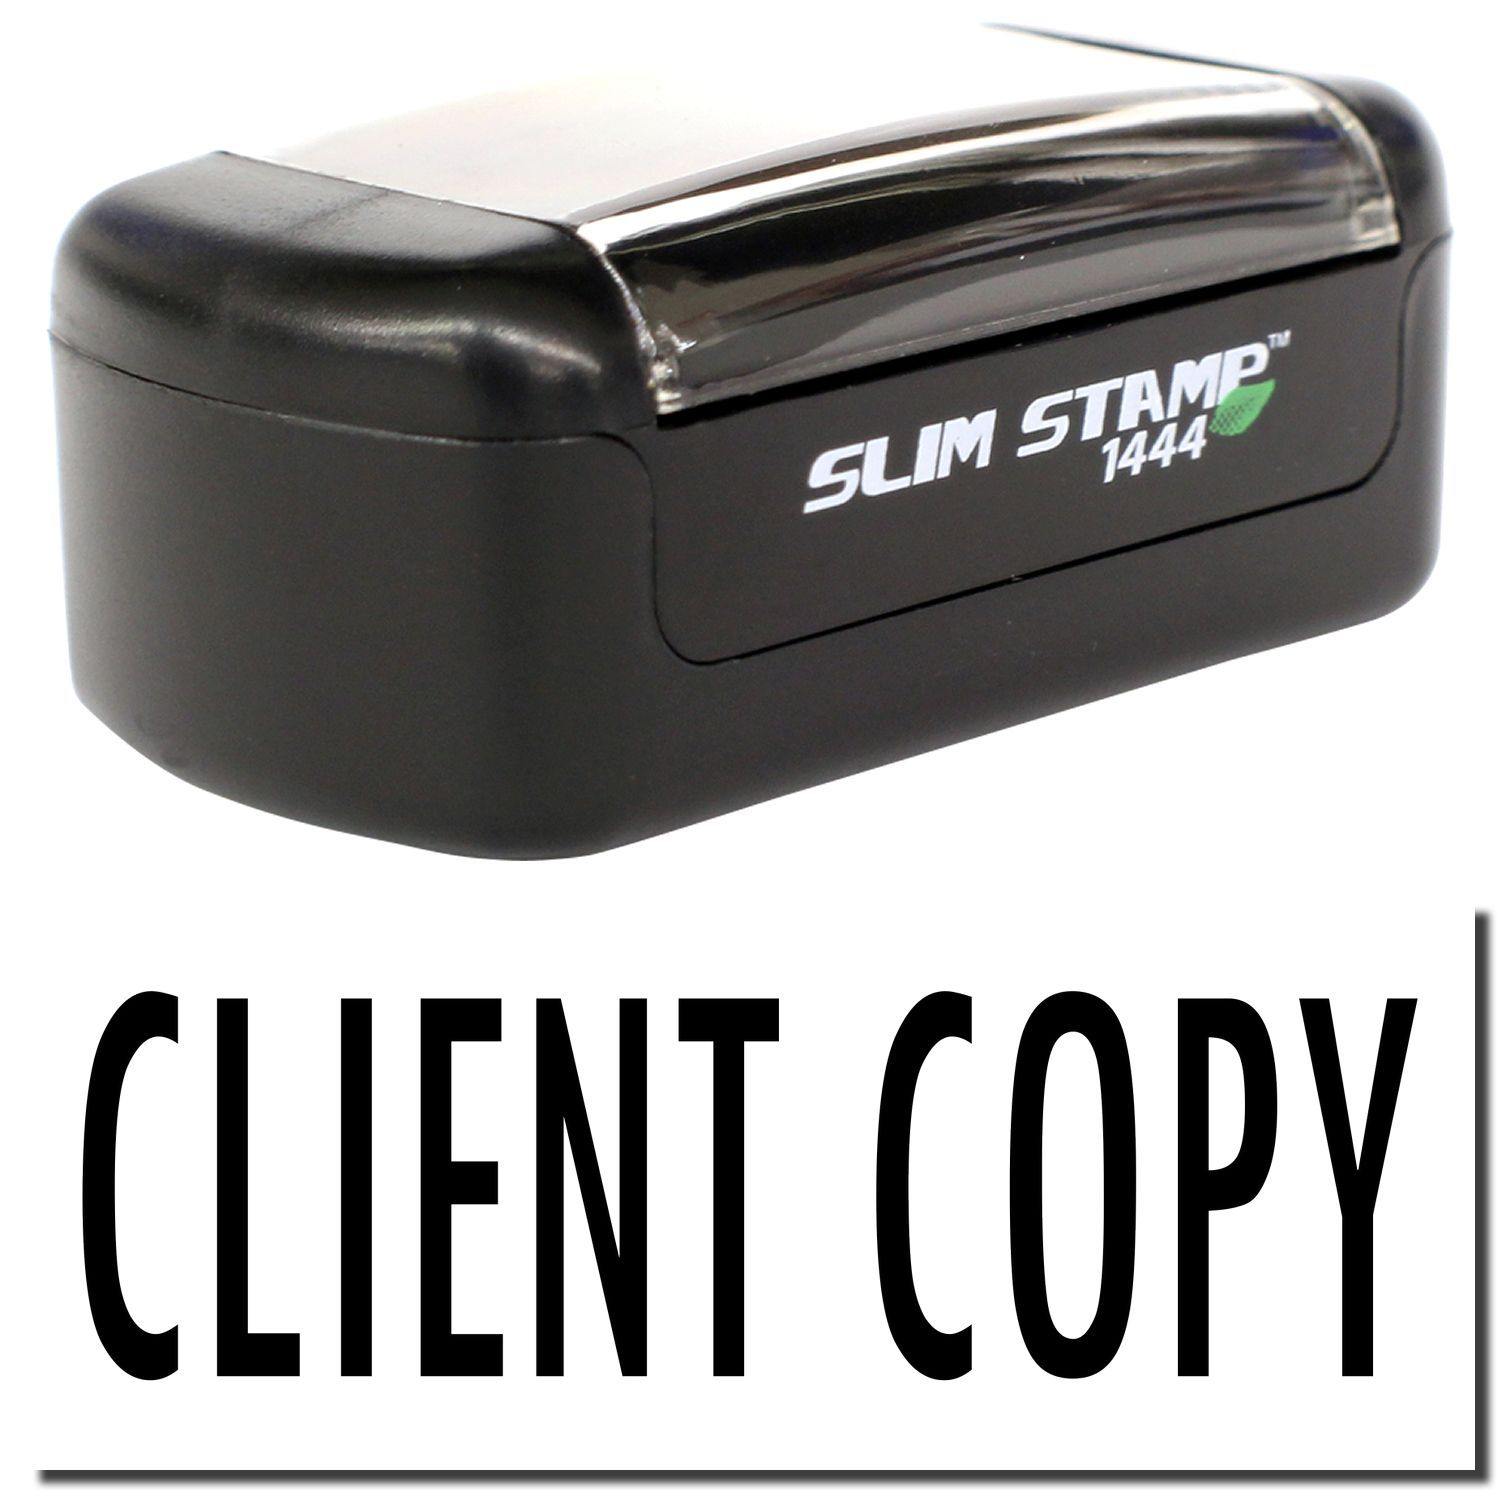 A stock office pre-inked stamp with a stamped image showing how the text "CLIENT COPY" is displayed after stamping.